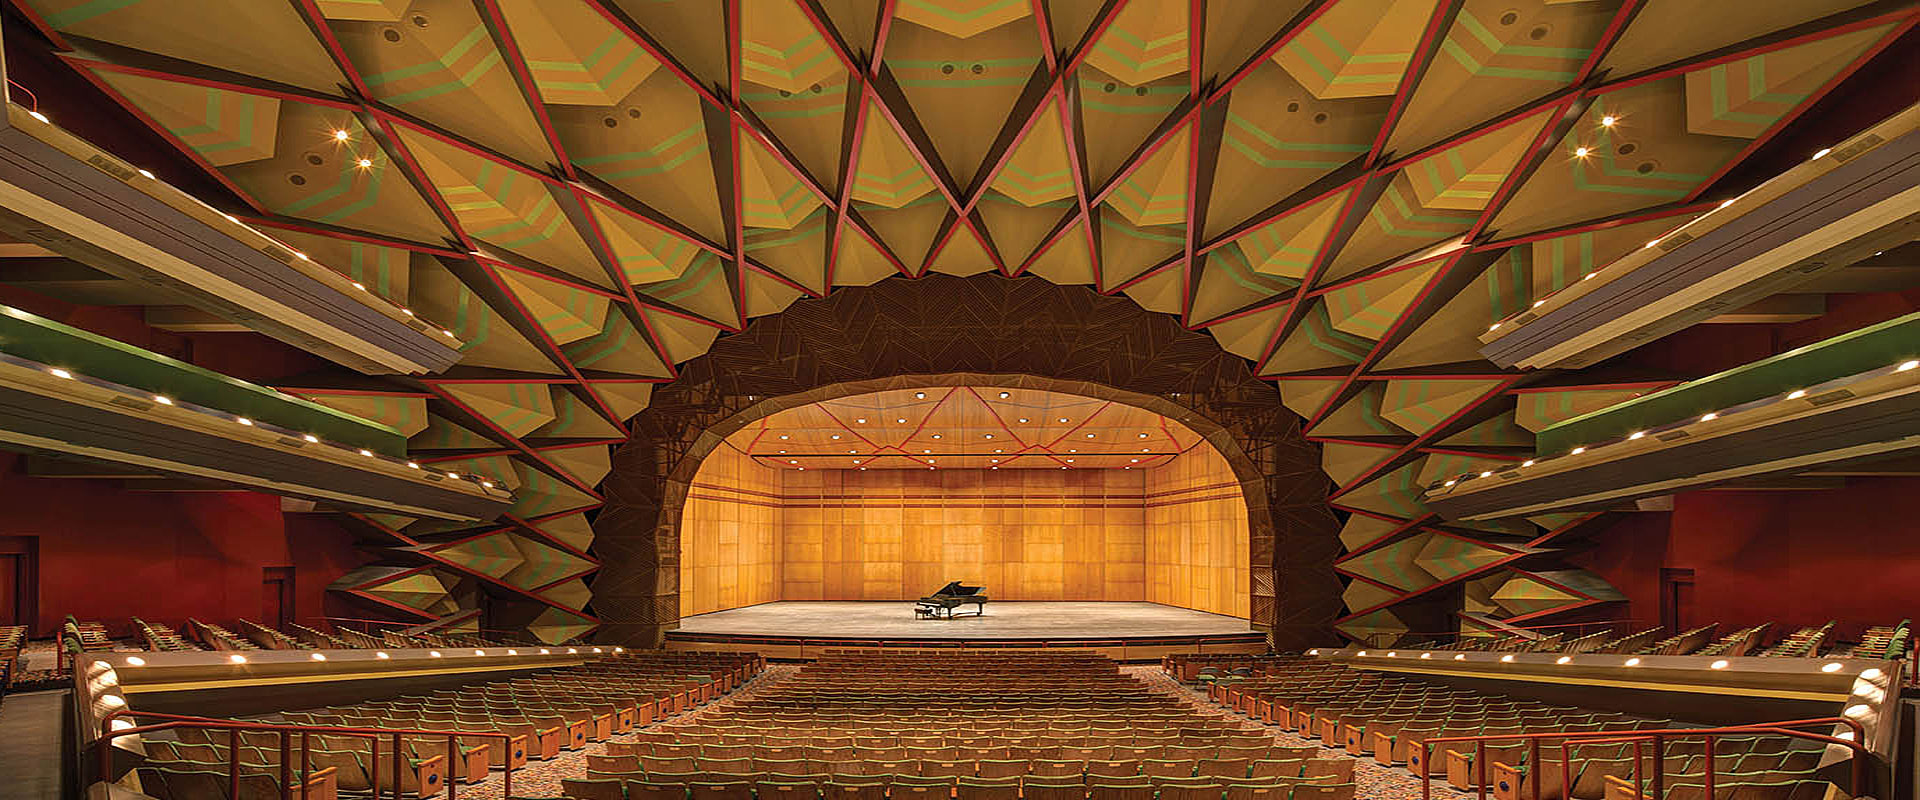 Atwood Concert Hall